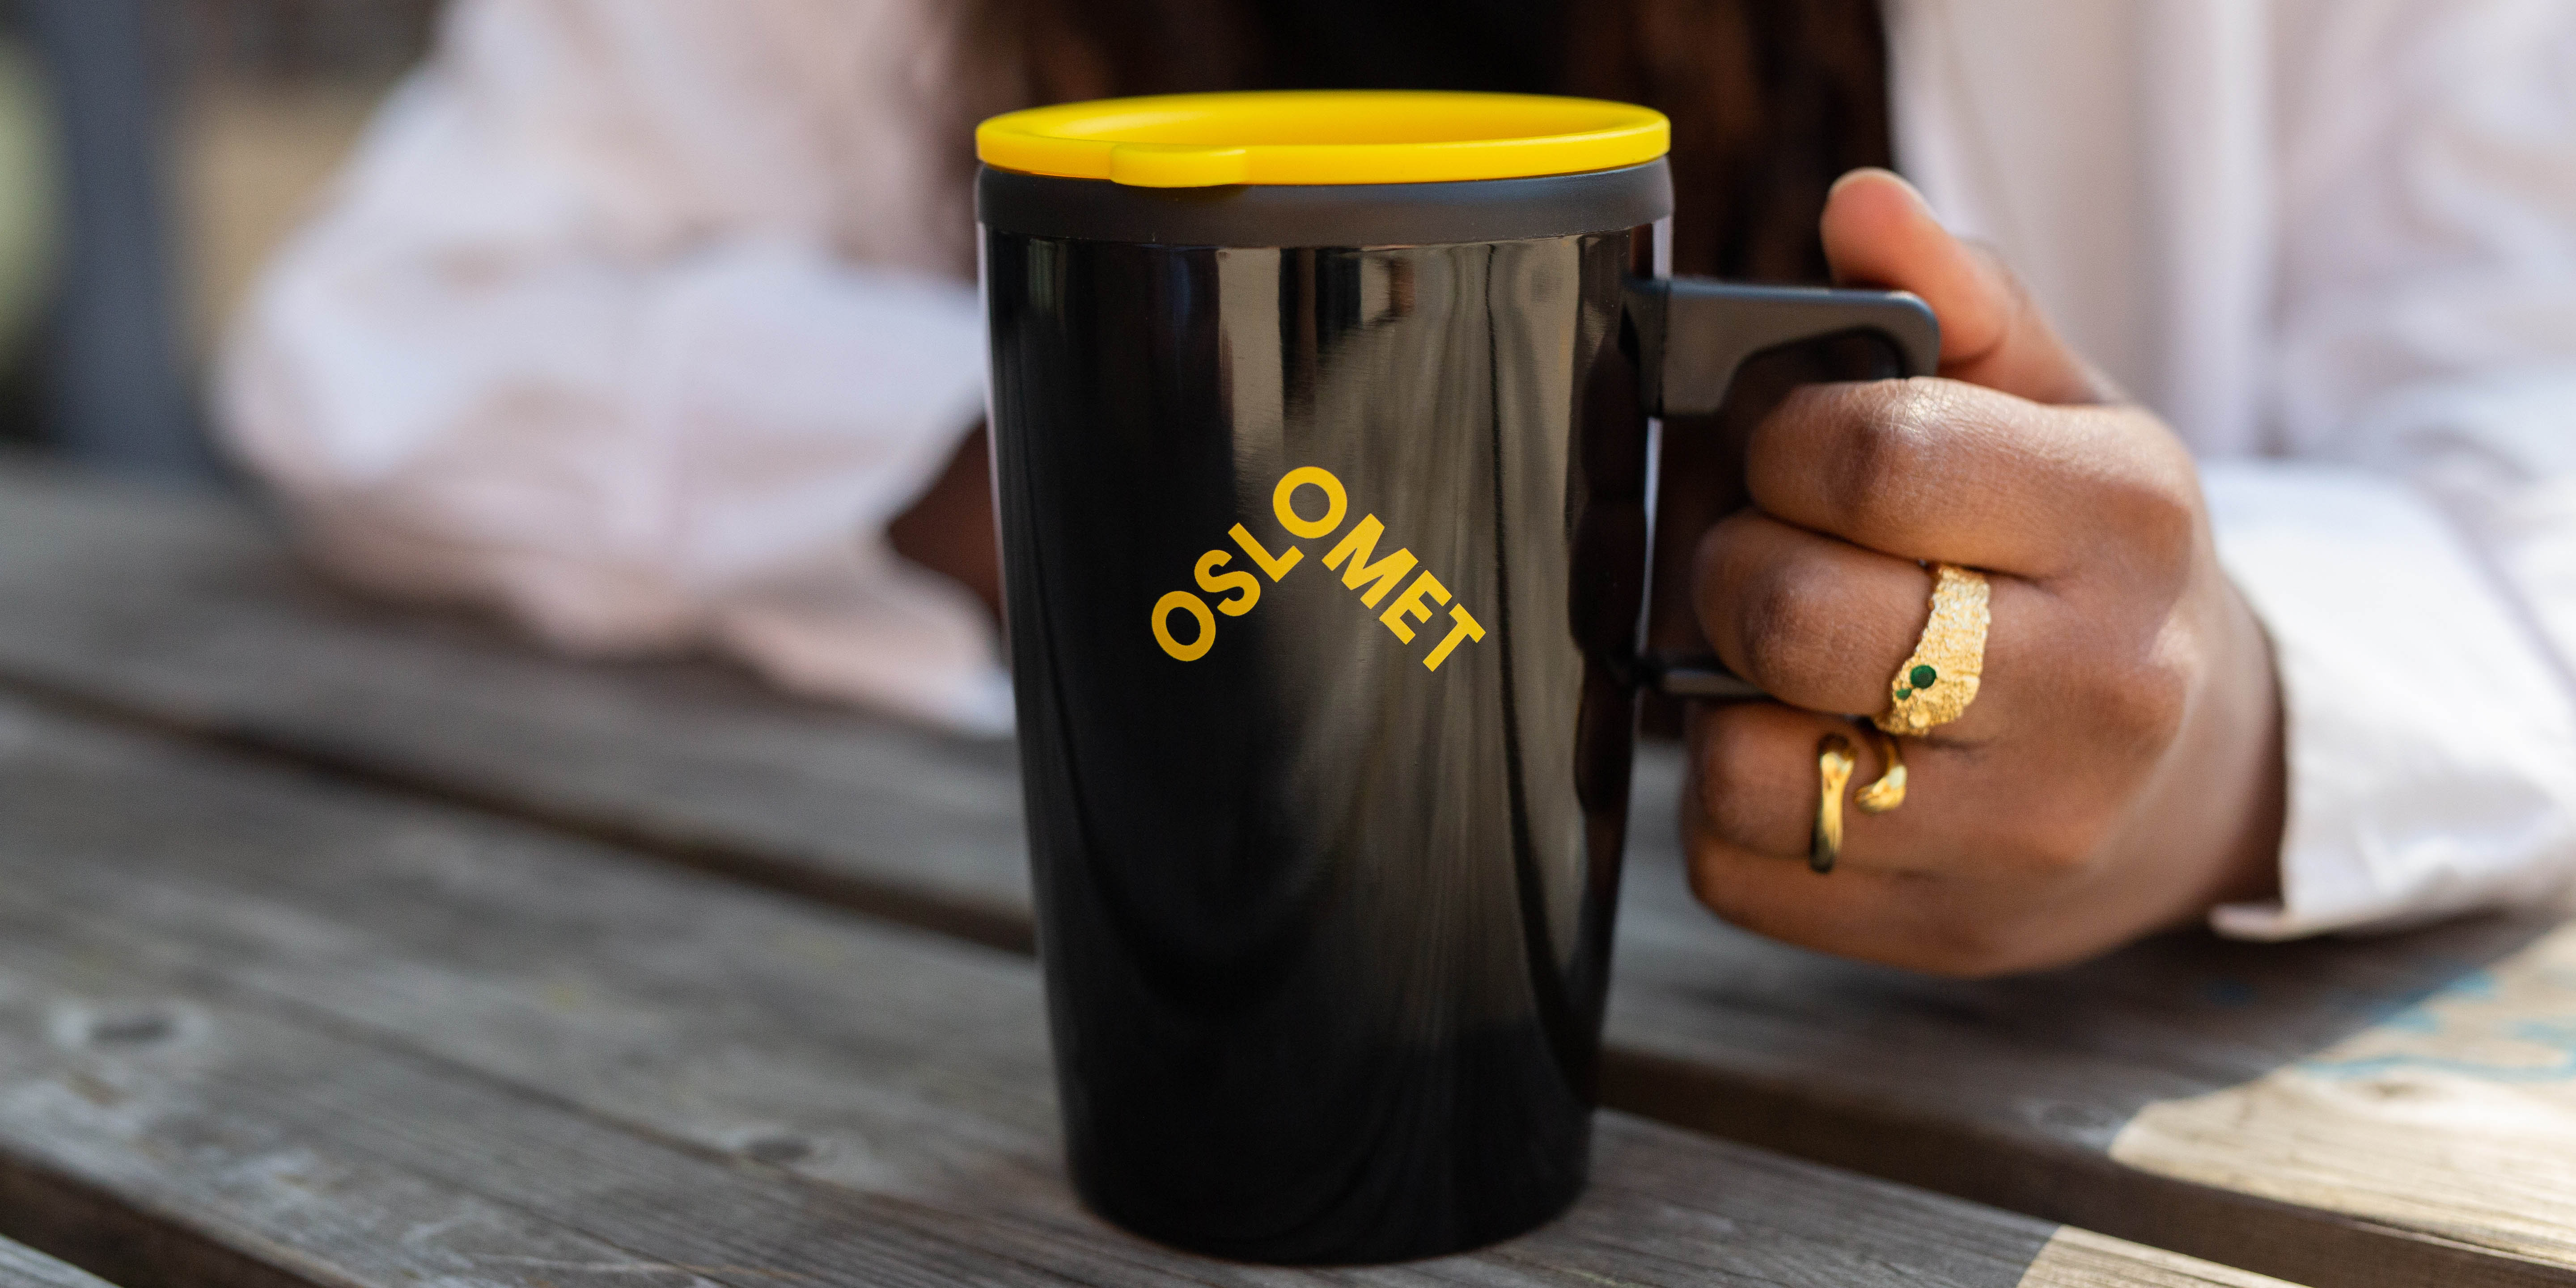 A black cup with a yellow OsloMet logo. The cup has a yellow lid